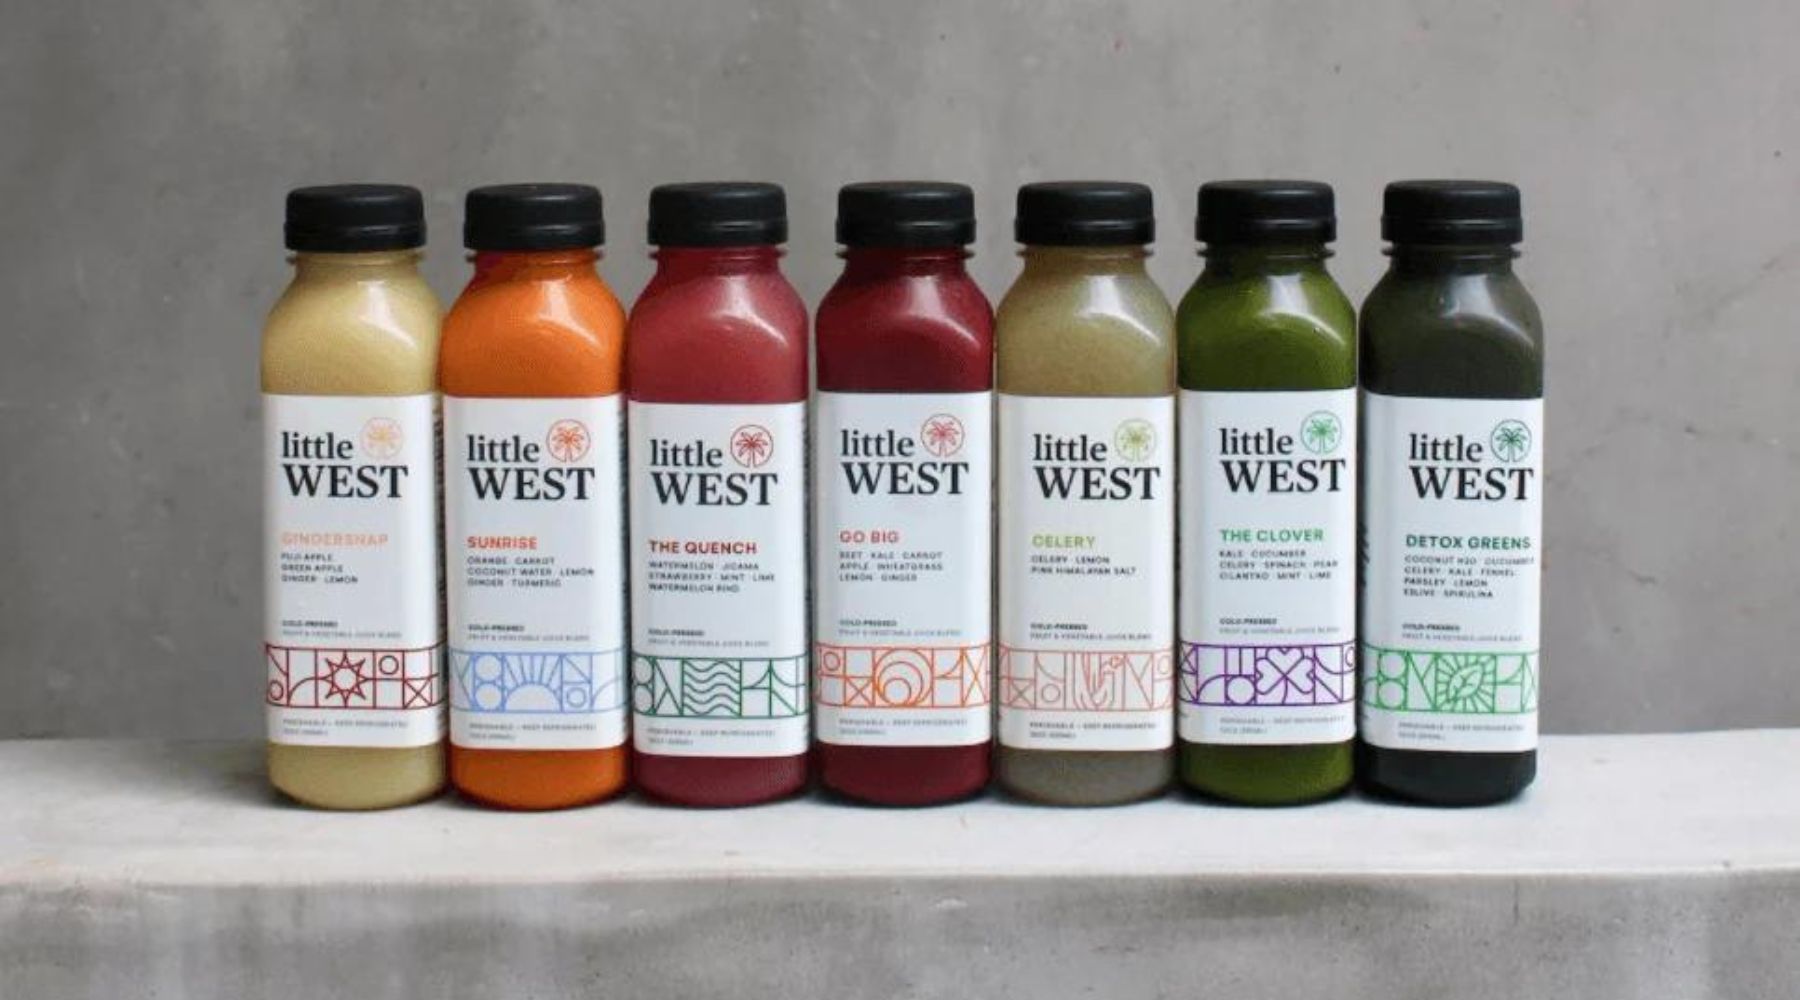 How To Do a New Year's Juice Cleanse - Little West